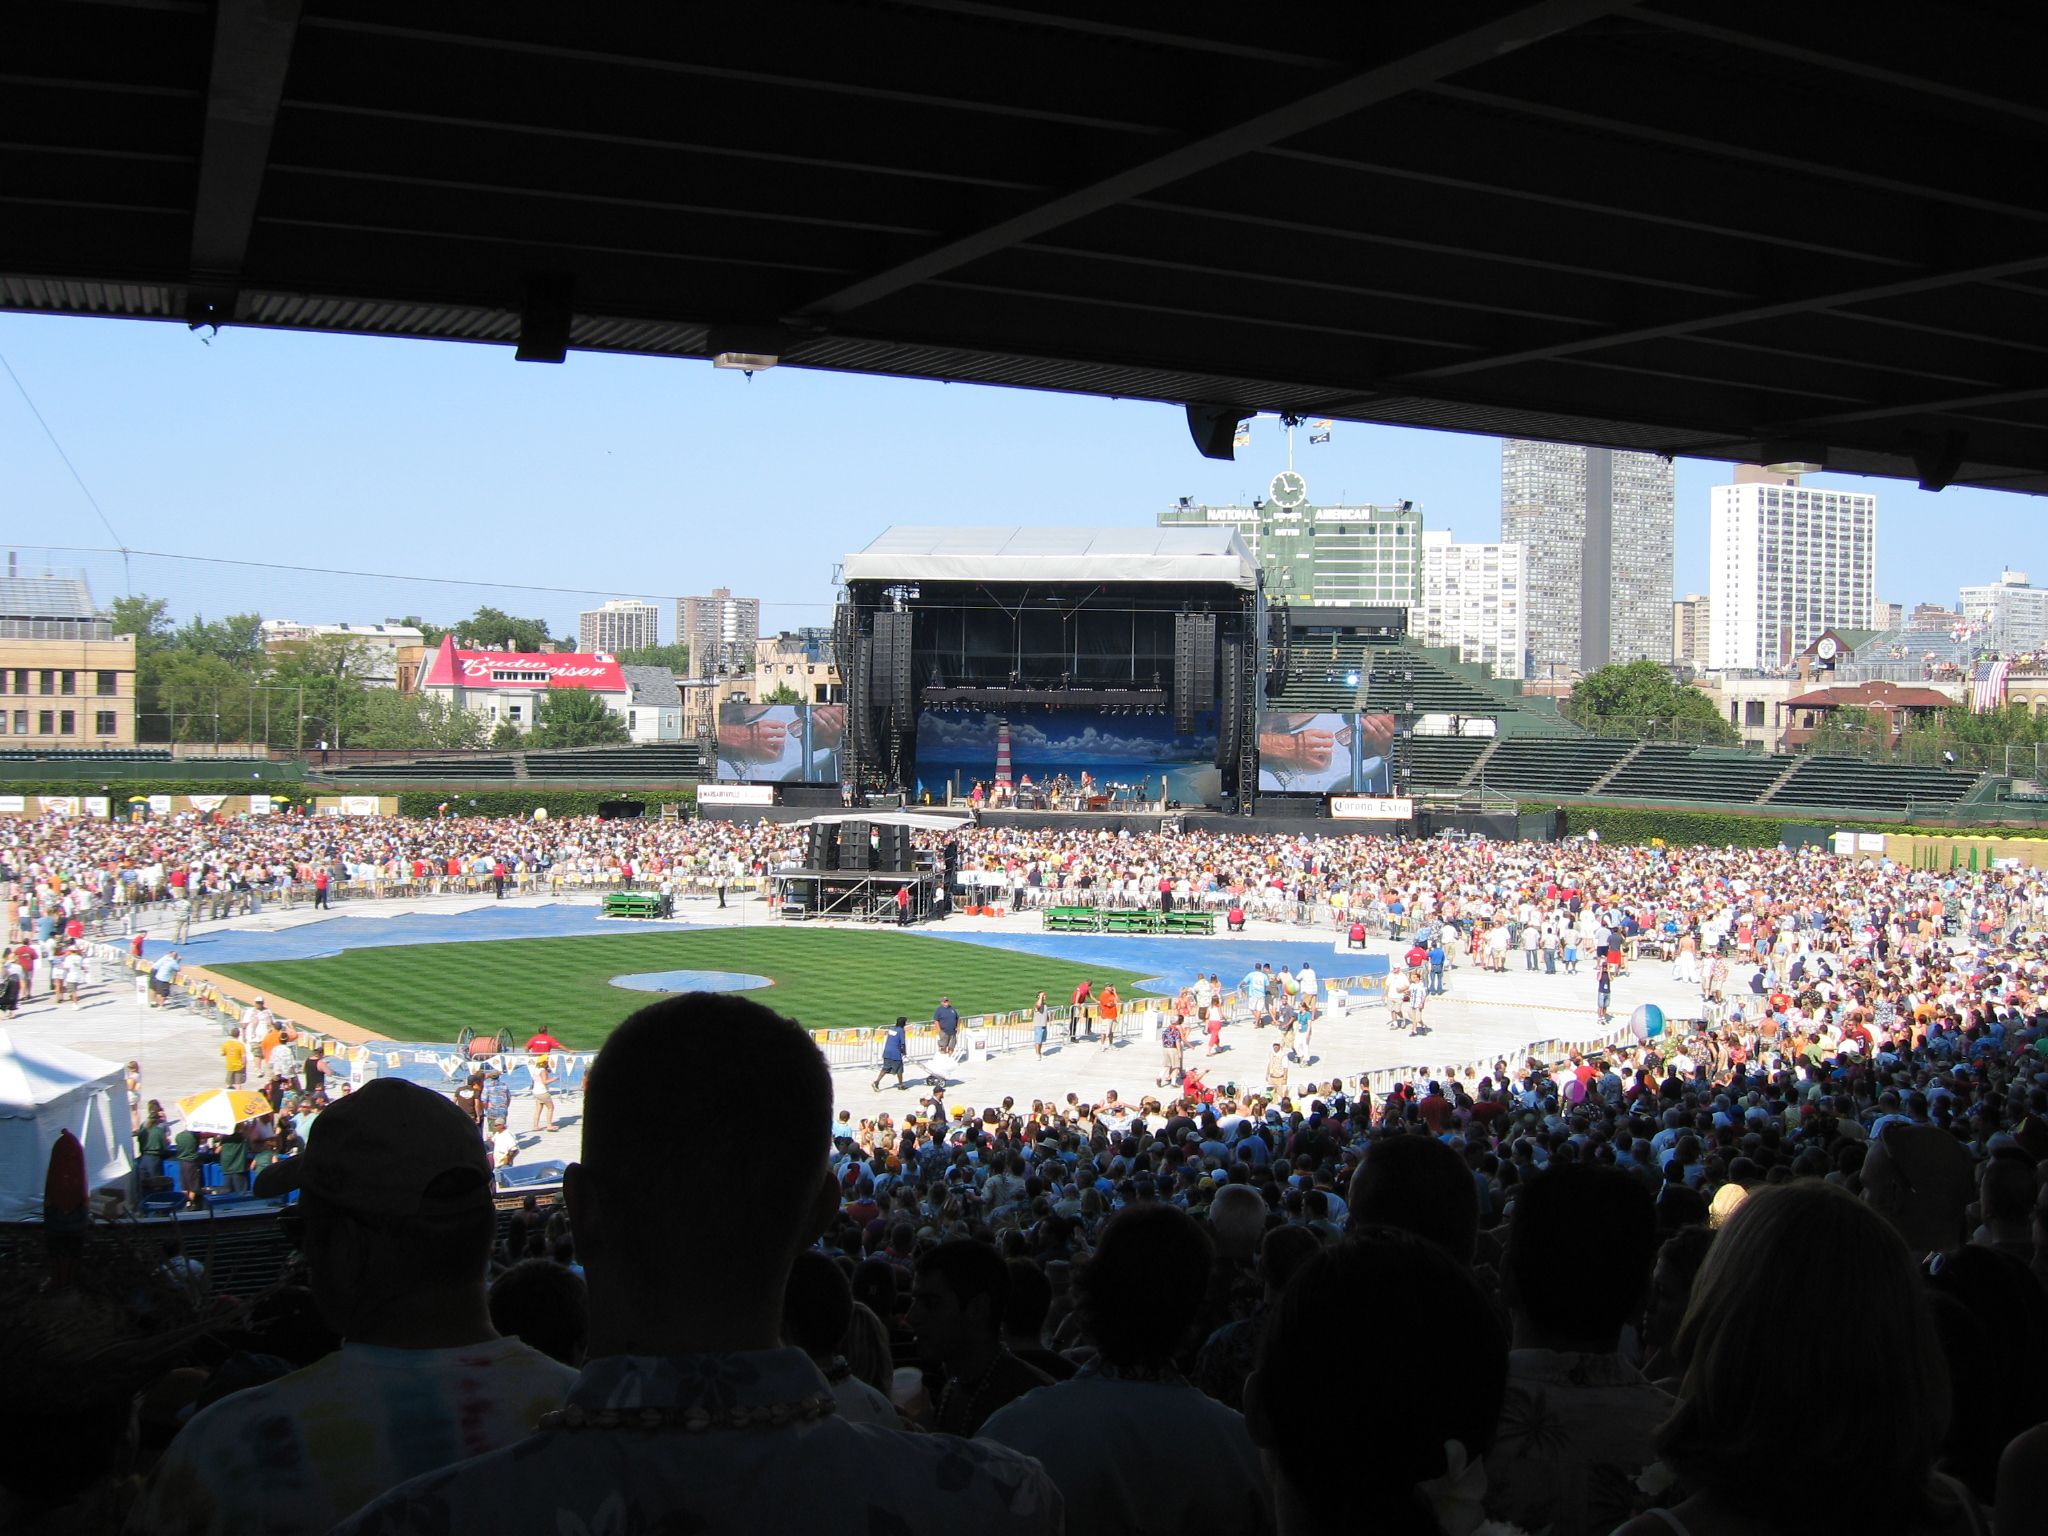 section 218 seat view  for concert - wrigley field